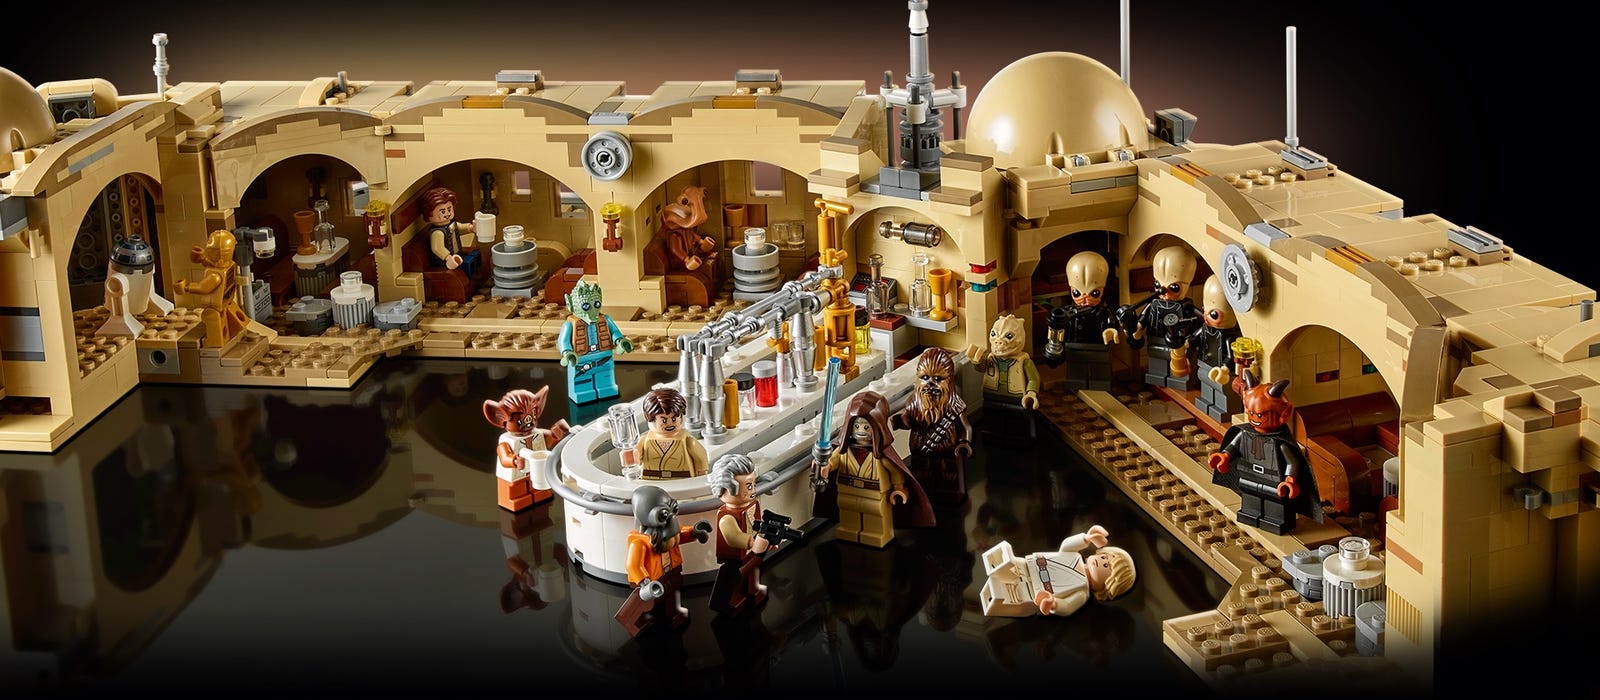 Behind-the-scenes of the 'Star Wars' Cantina bar set